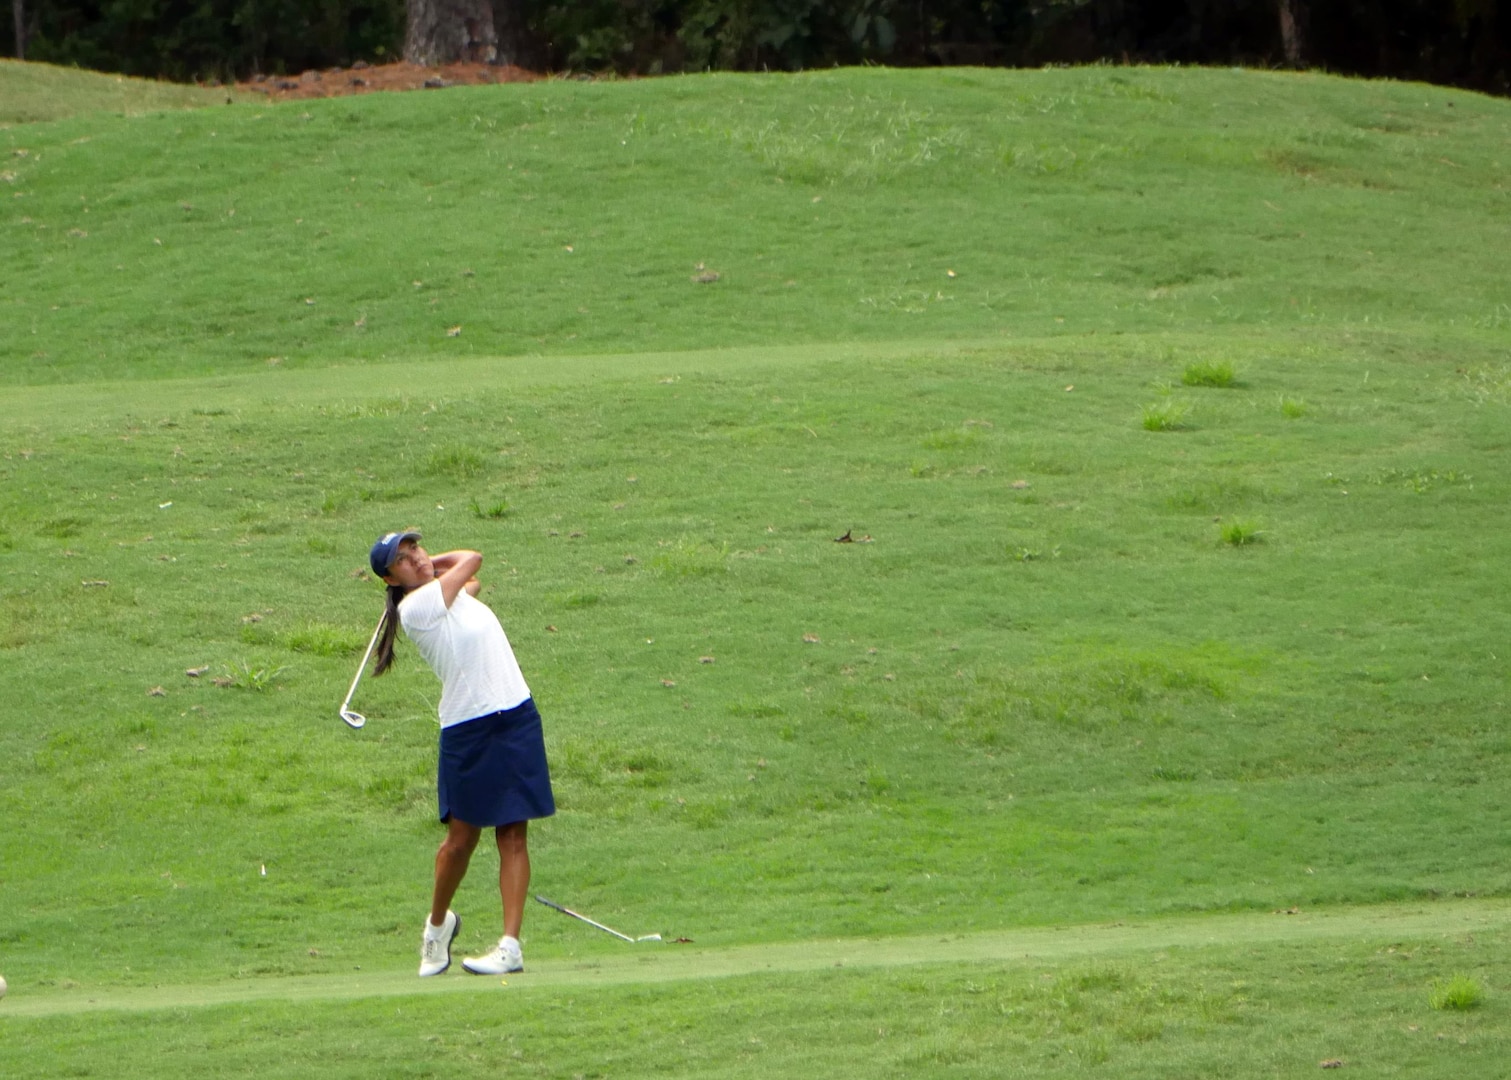 Navy Petty Officer 3rd Class Maggie Ramirez on the fairway during the 2016 Armed Forces Golf Championship at Fort Jackson, S.C. 20-23 August.  Ramirez took home the gold medal in the Women's Competition.  